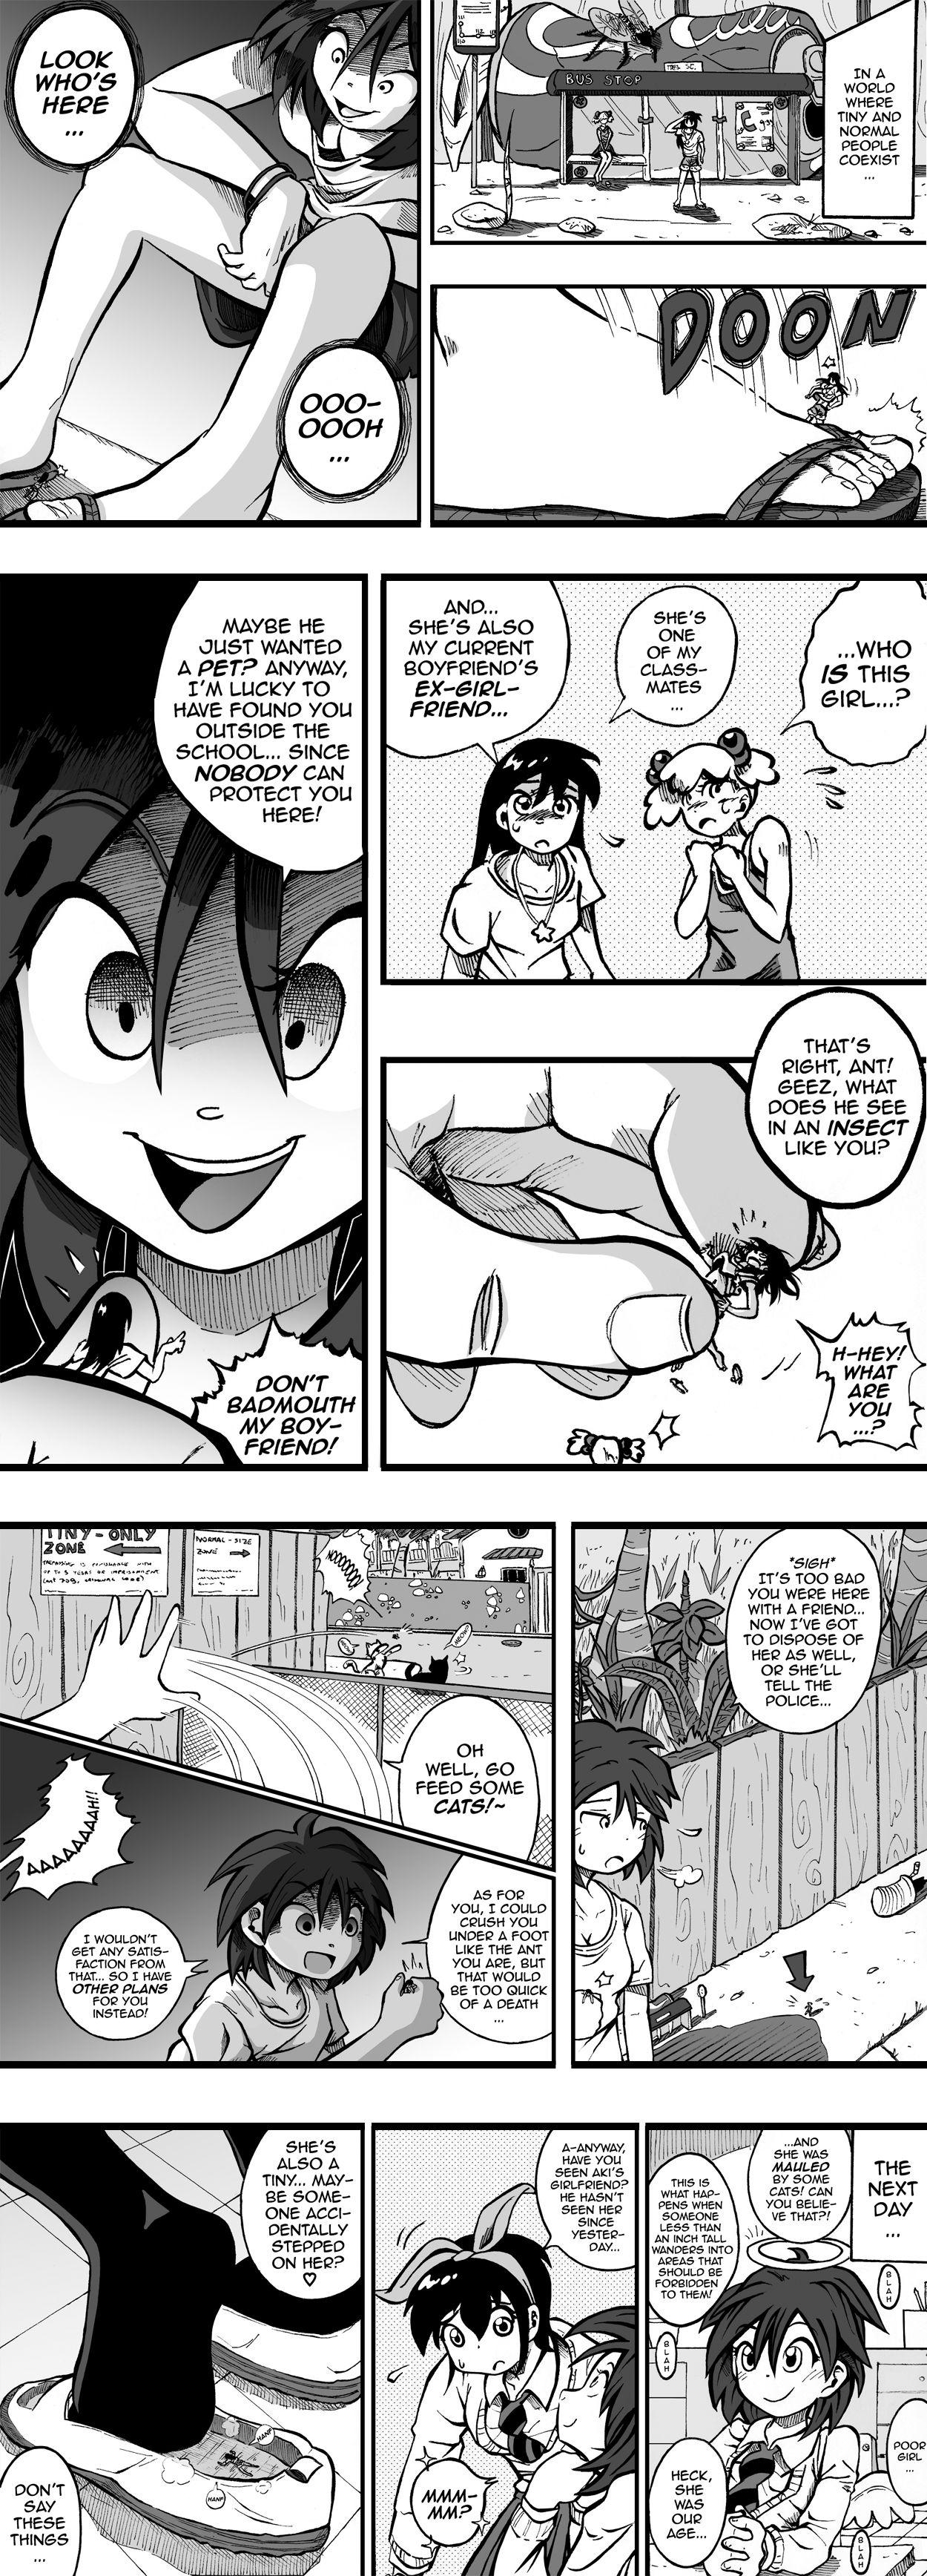 Eating Pussy Half Inch High ( by labbaART ) Ongoing Outdoors - Page 3